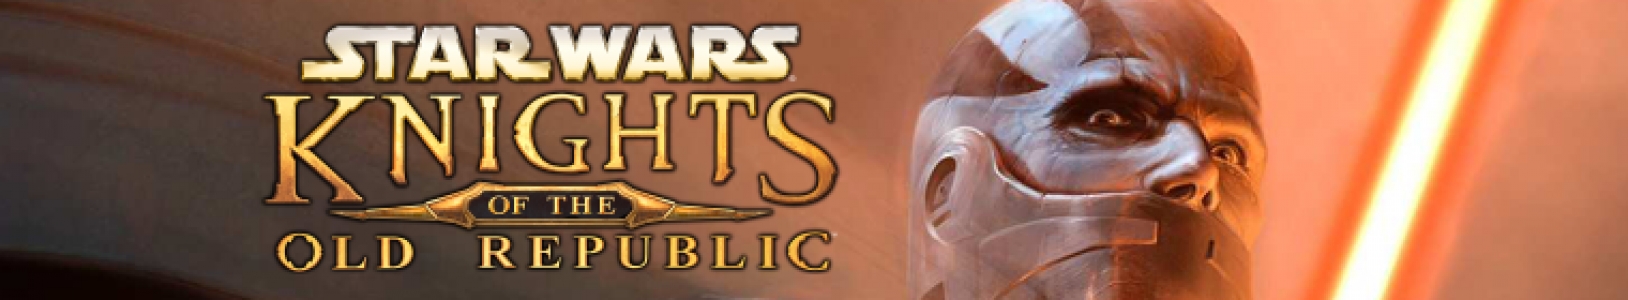 Star Wars: Knights of the Old Republic banner